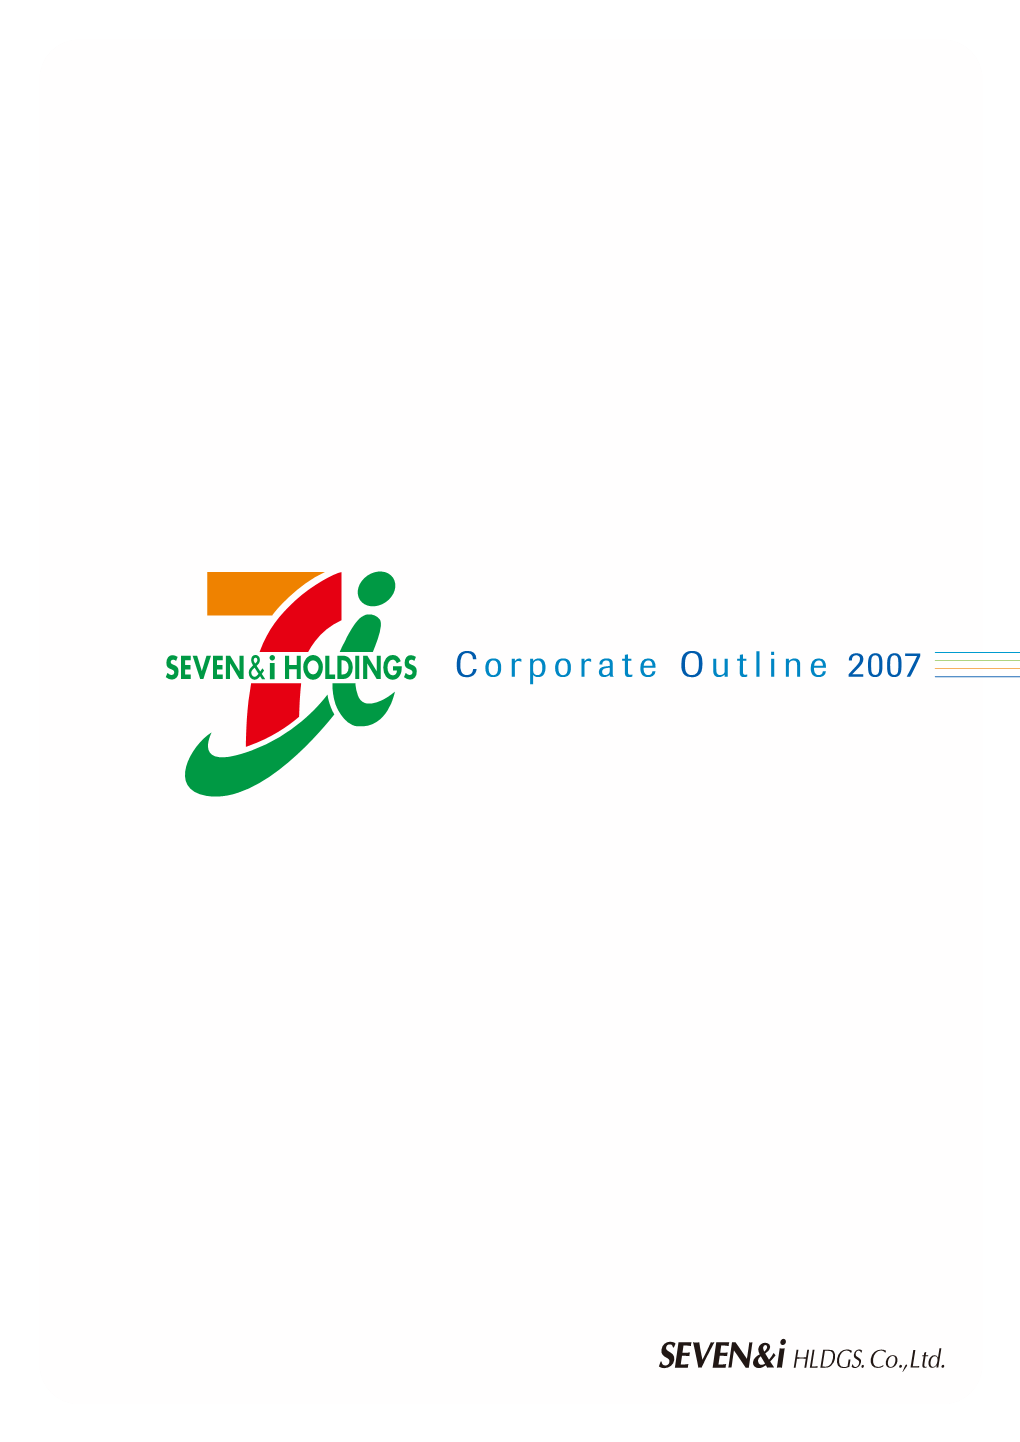 Corporate Outline 2007